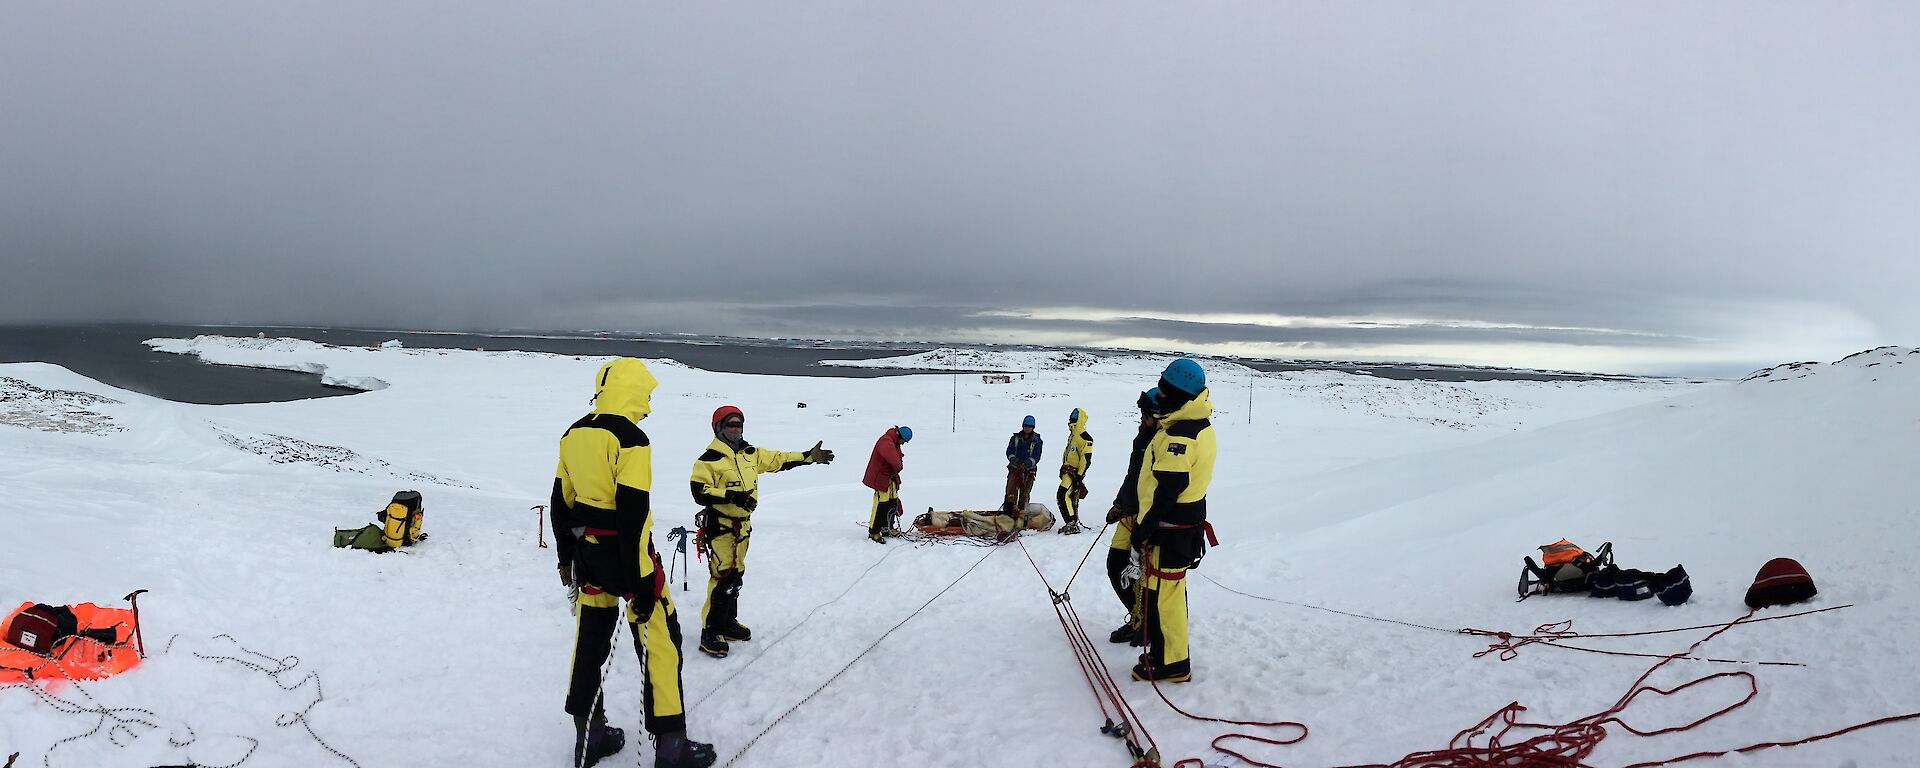 Wide angle view of stretcher connected to rope system with expos on either side listening to instructor. Set up on snowy slope with sea and dark rain clouds in background